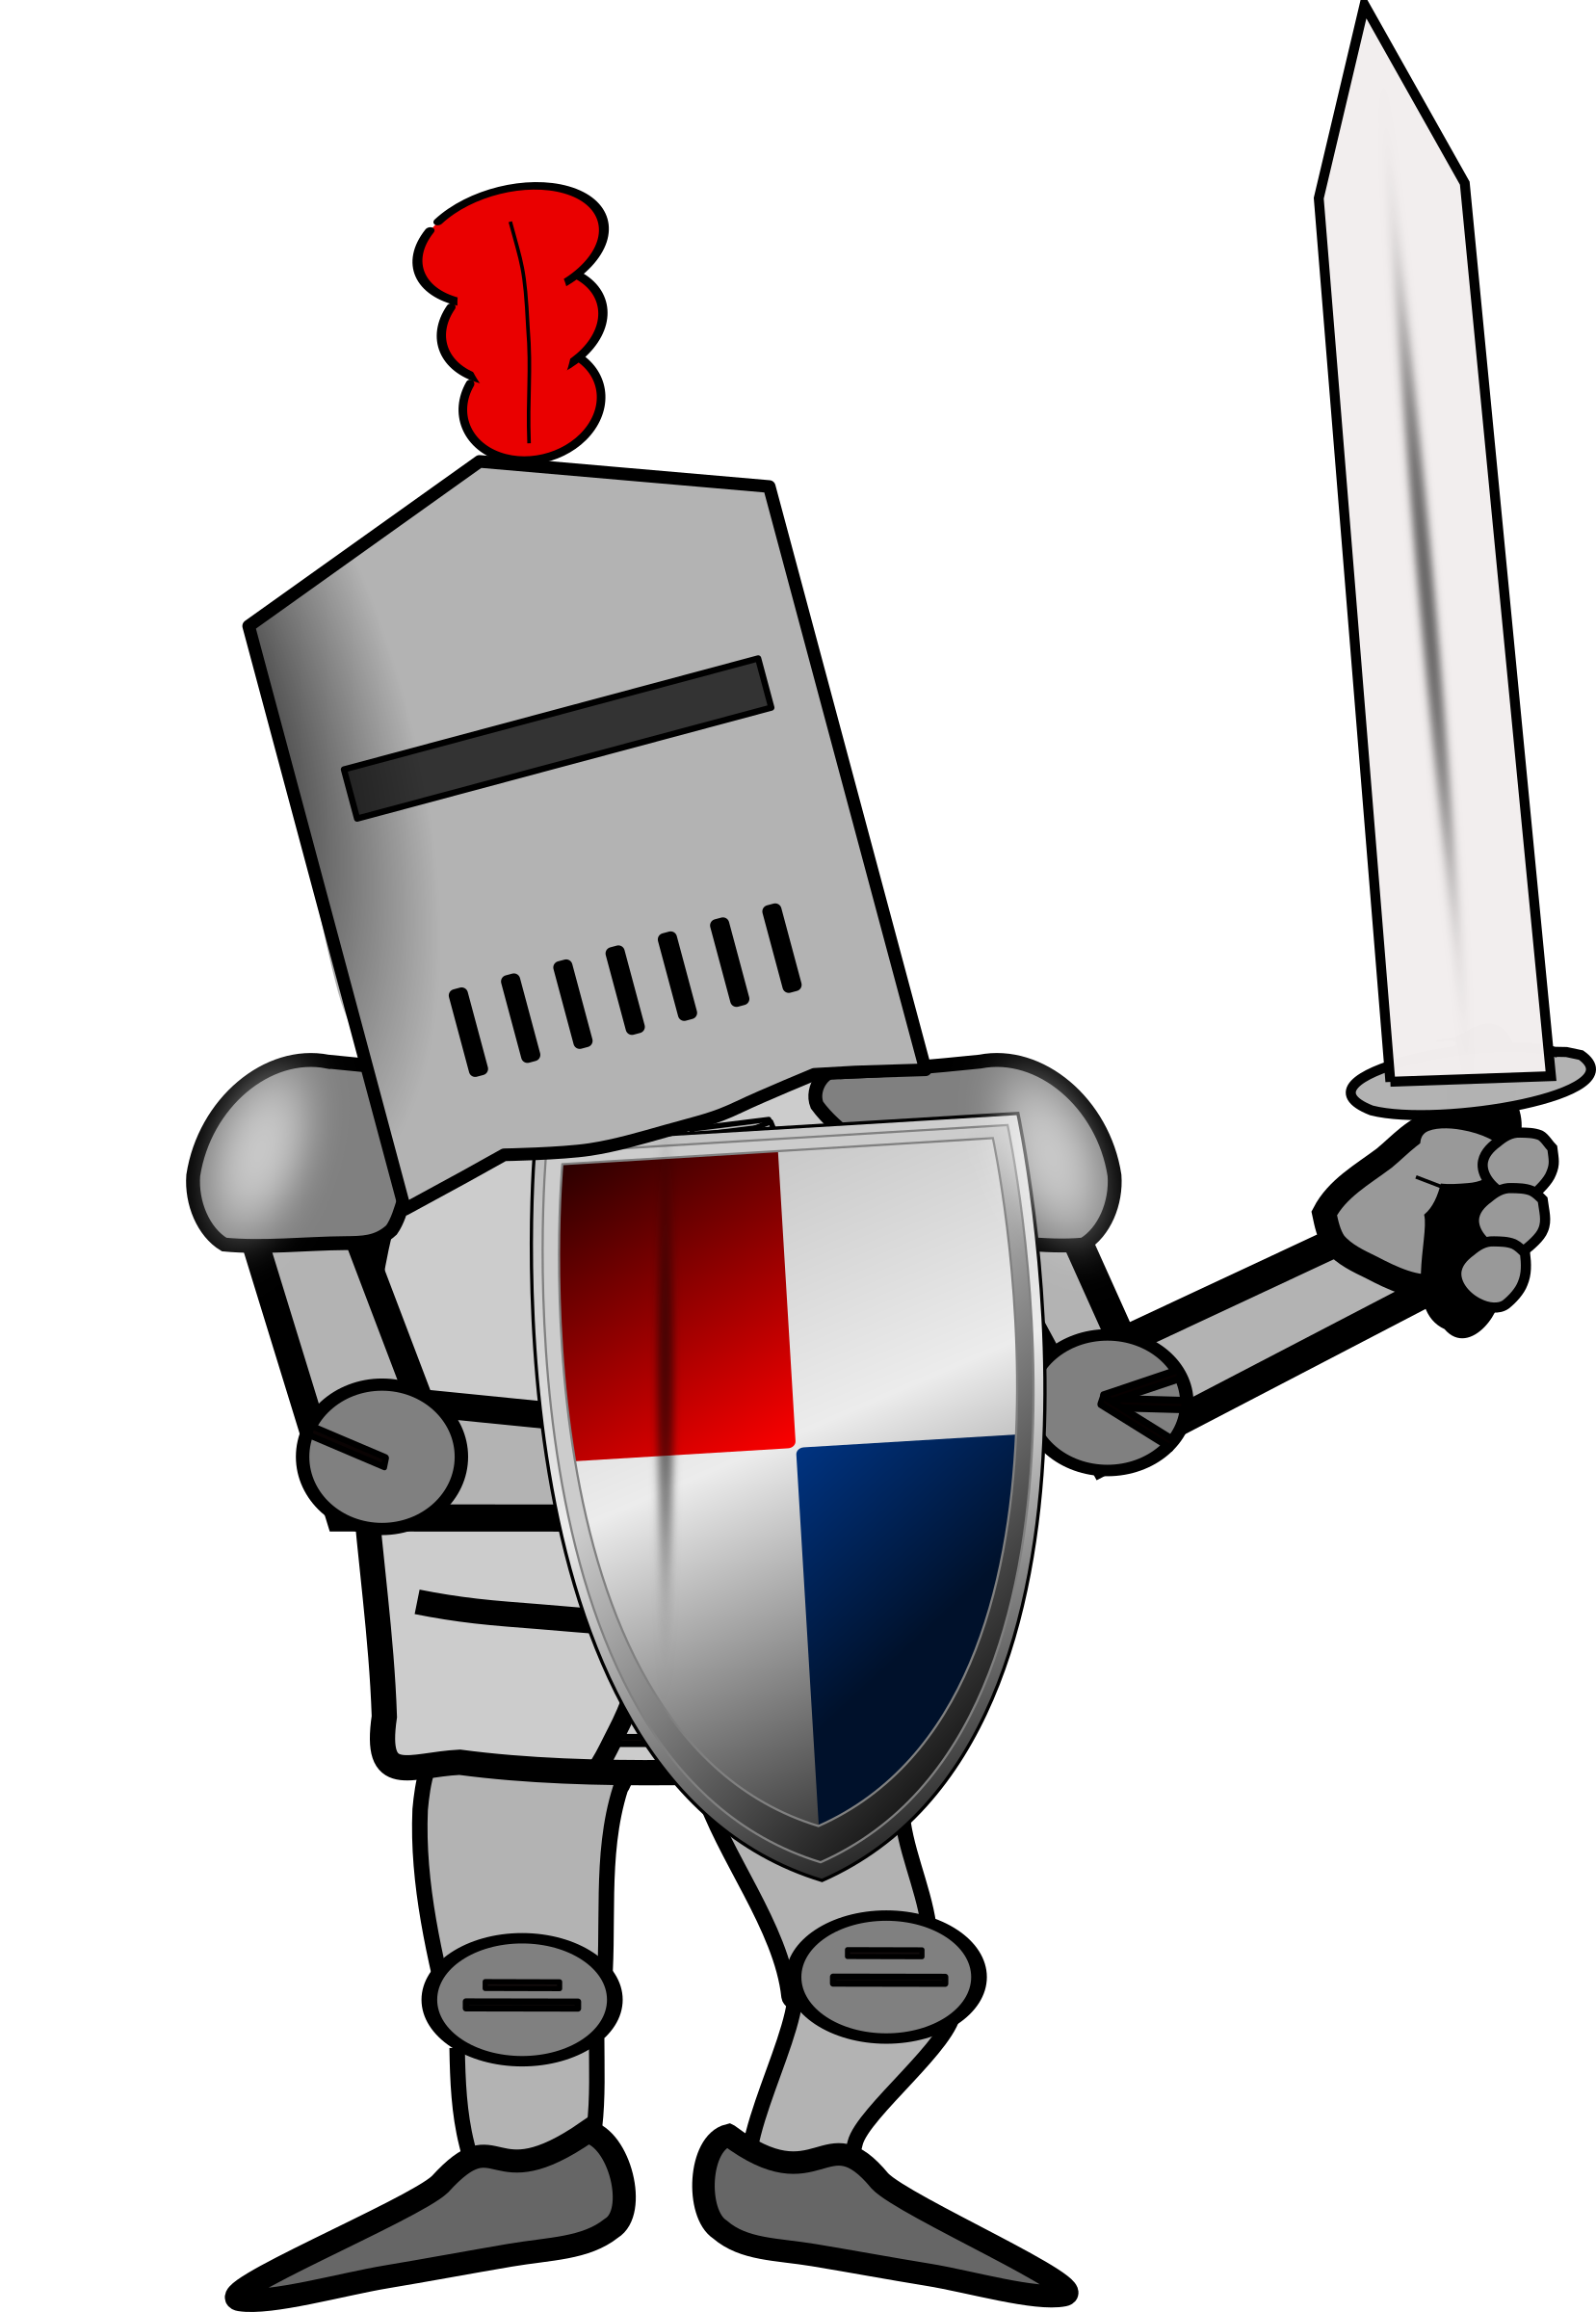 fight clipart medieval army